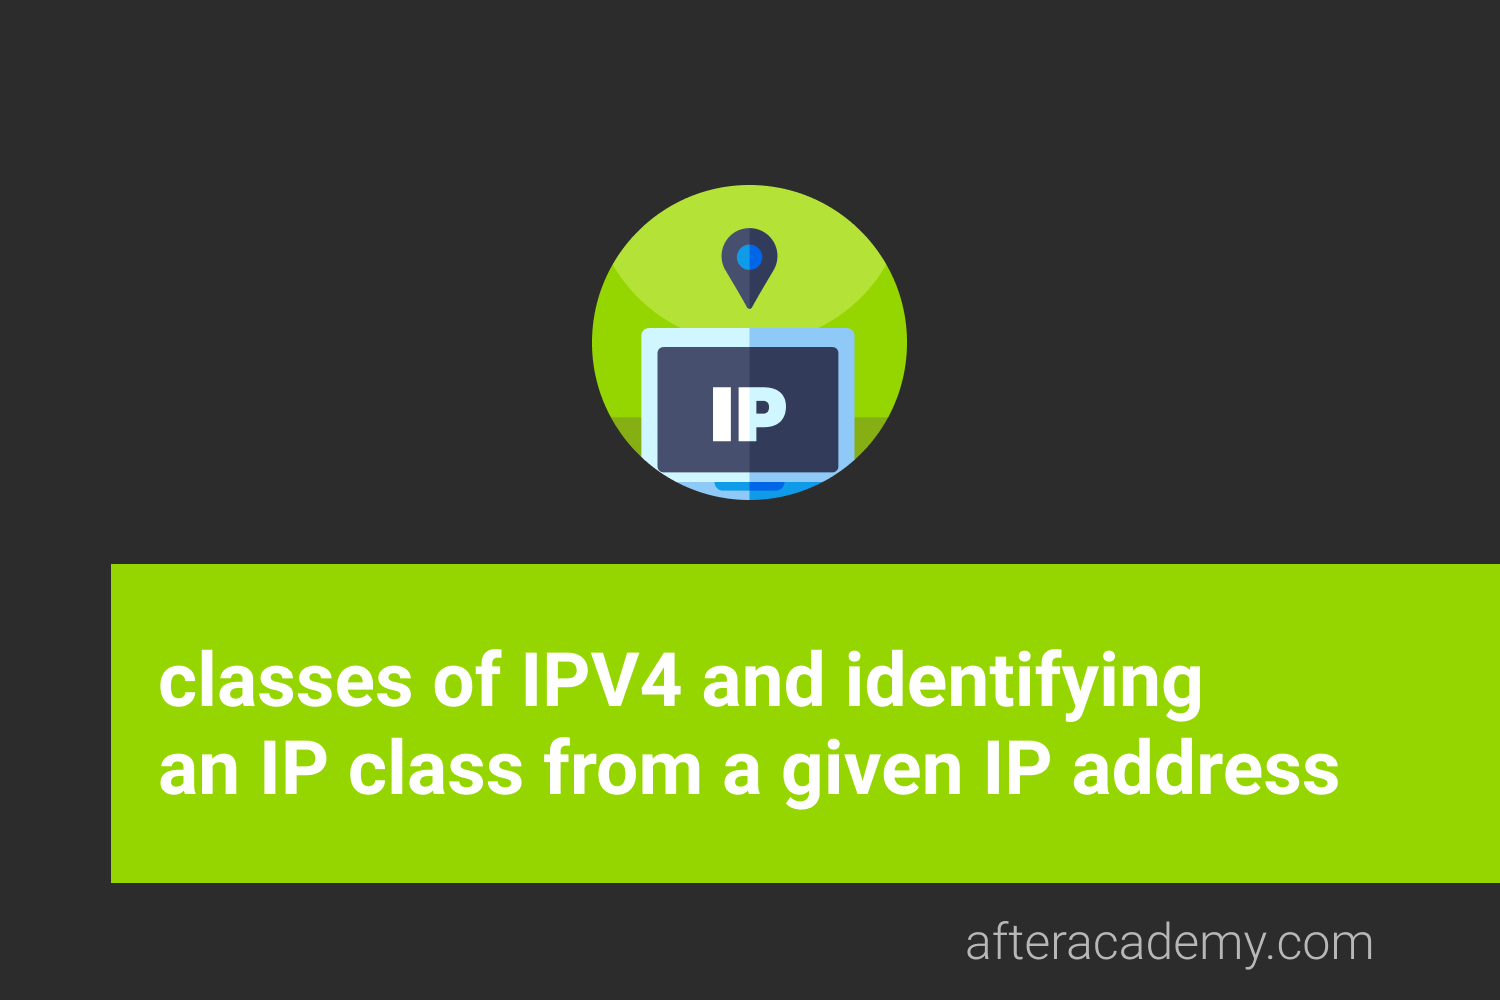 What are the classes of IPV4? How to identify IP class from a given IP address?